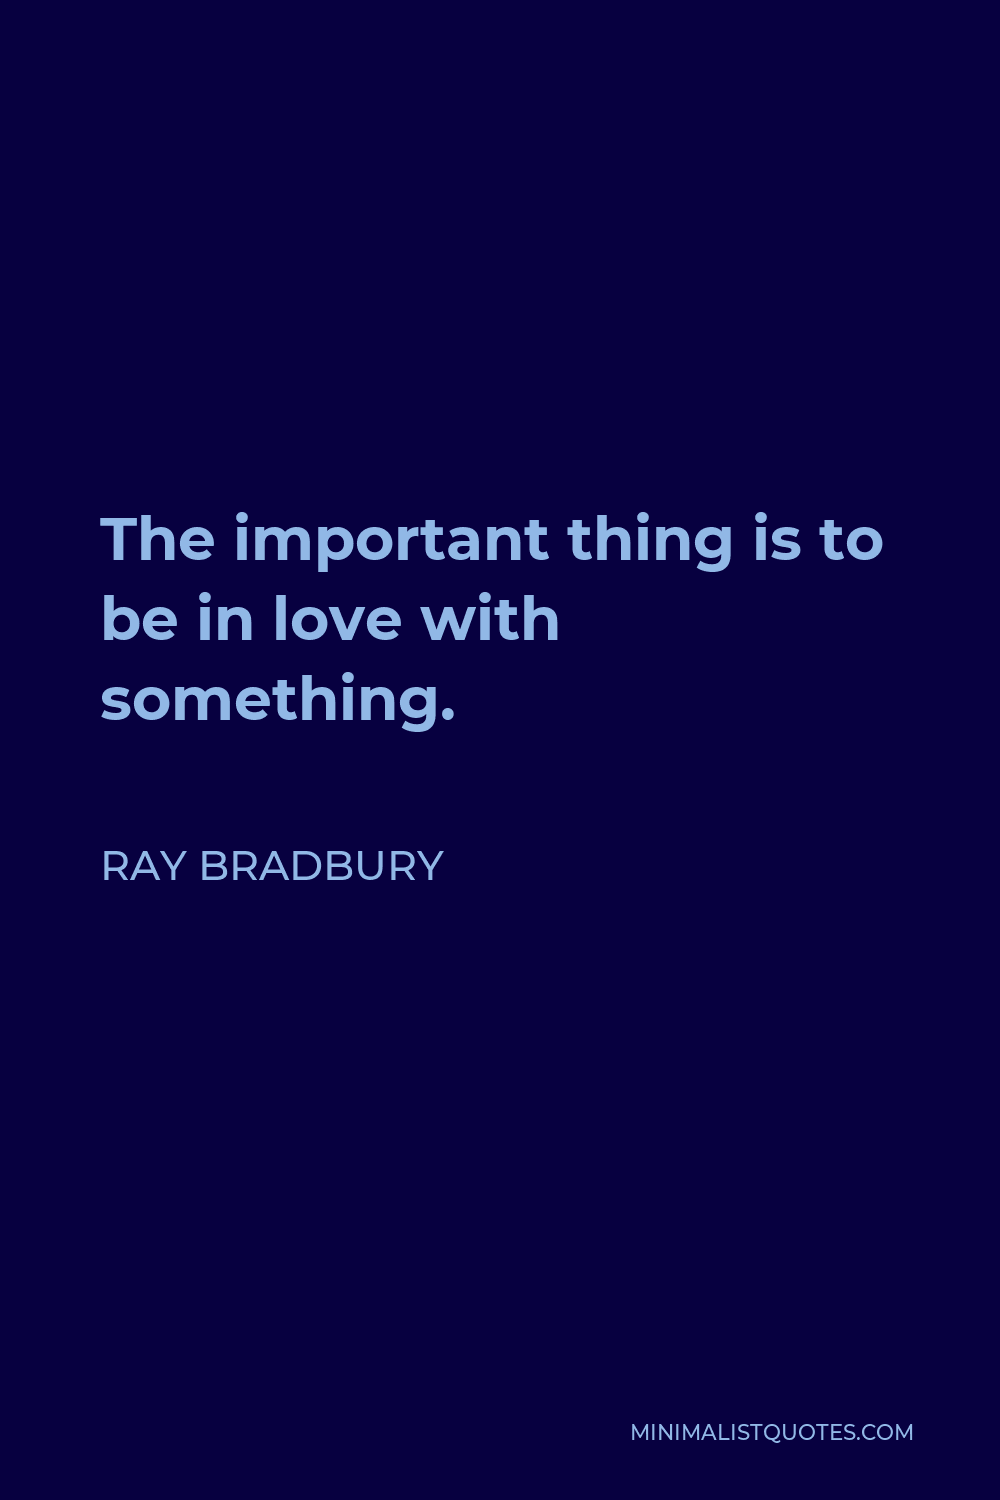 Ray Bradbury Quote: The important thing is to be in love with something.